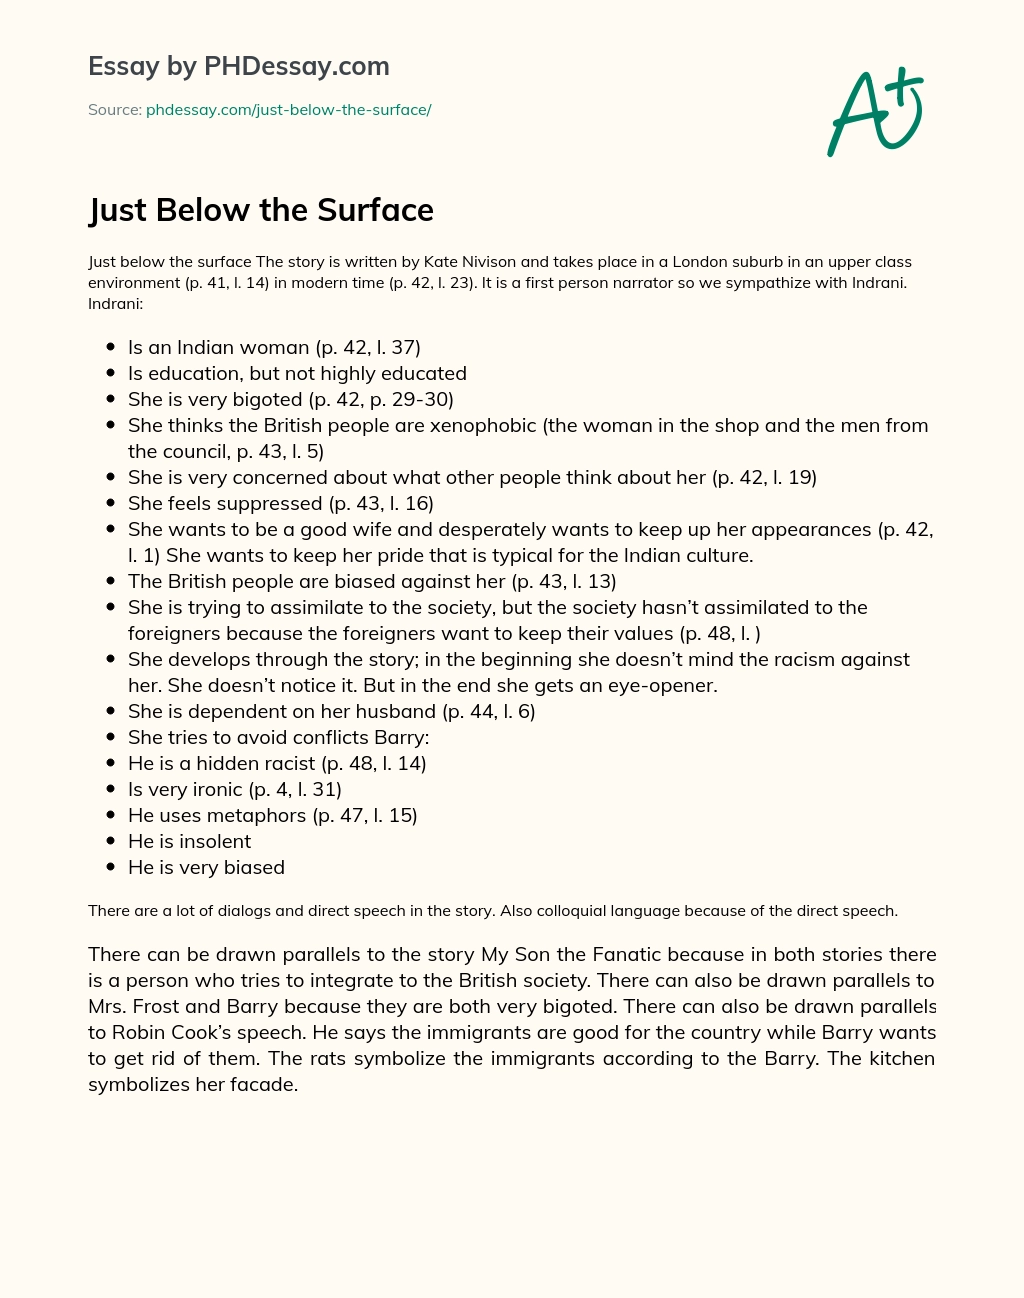 Just Below the Surface essay